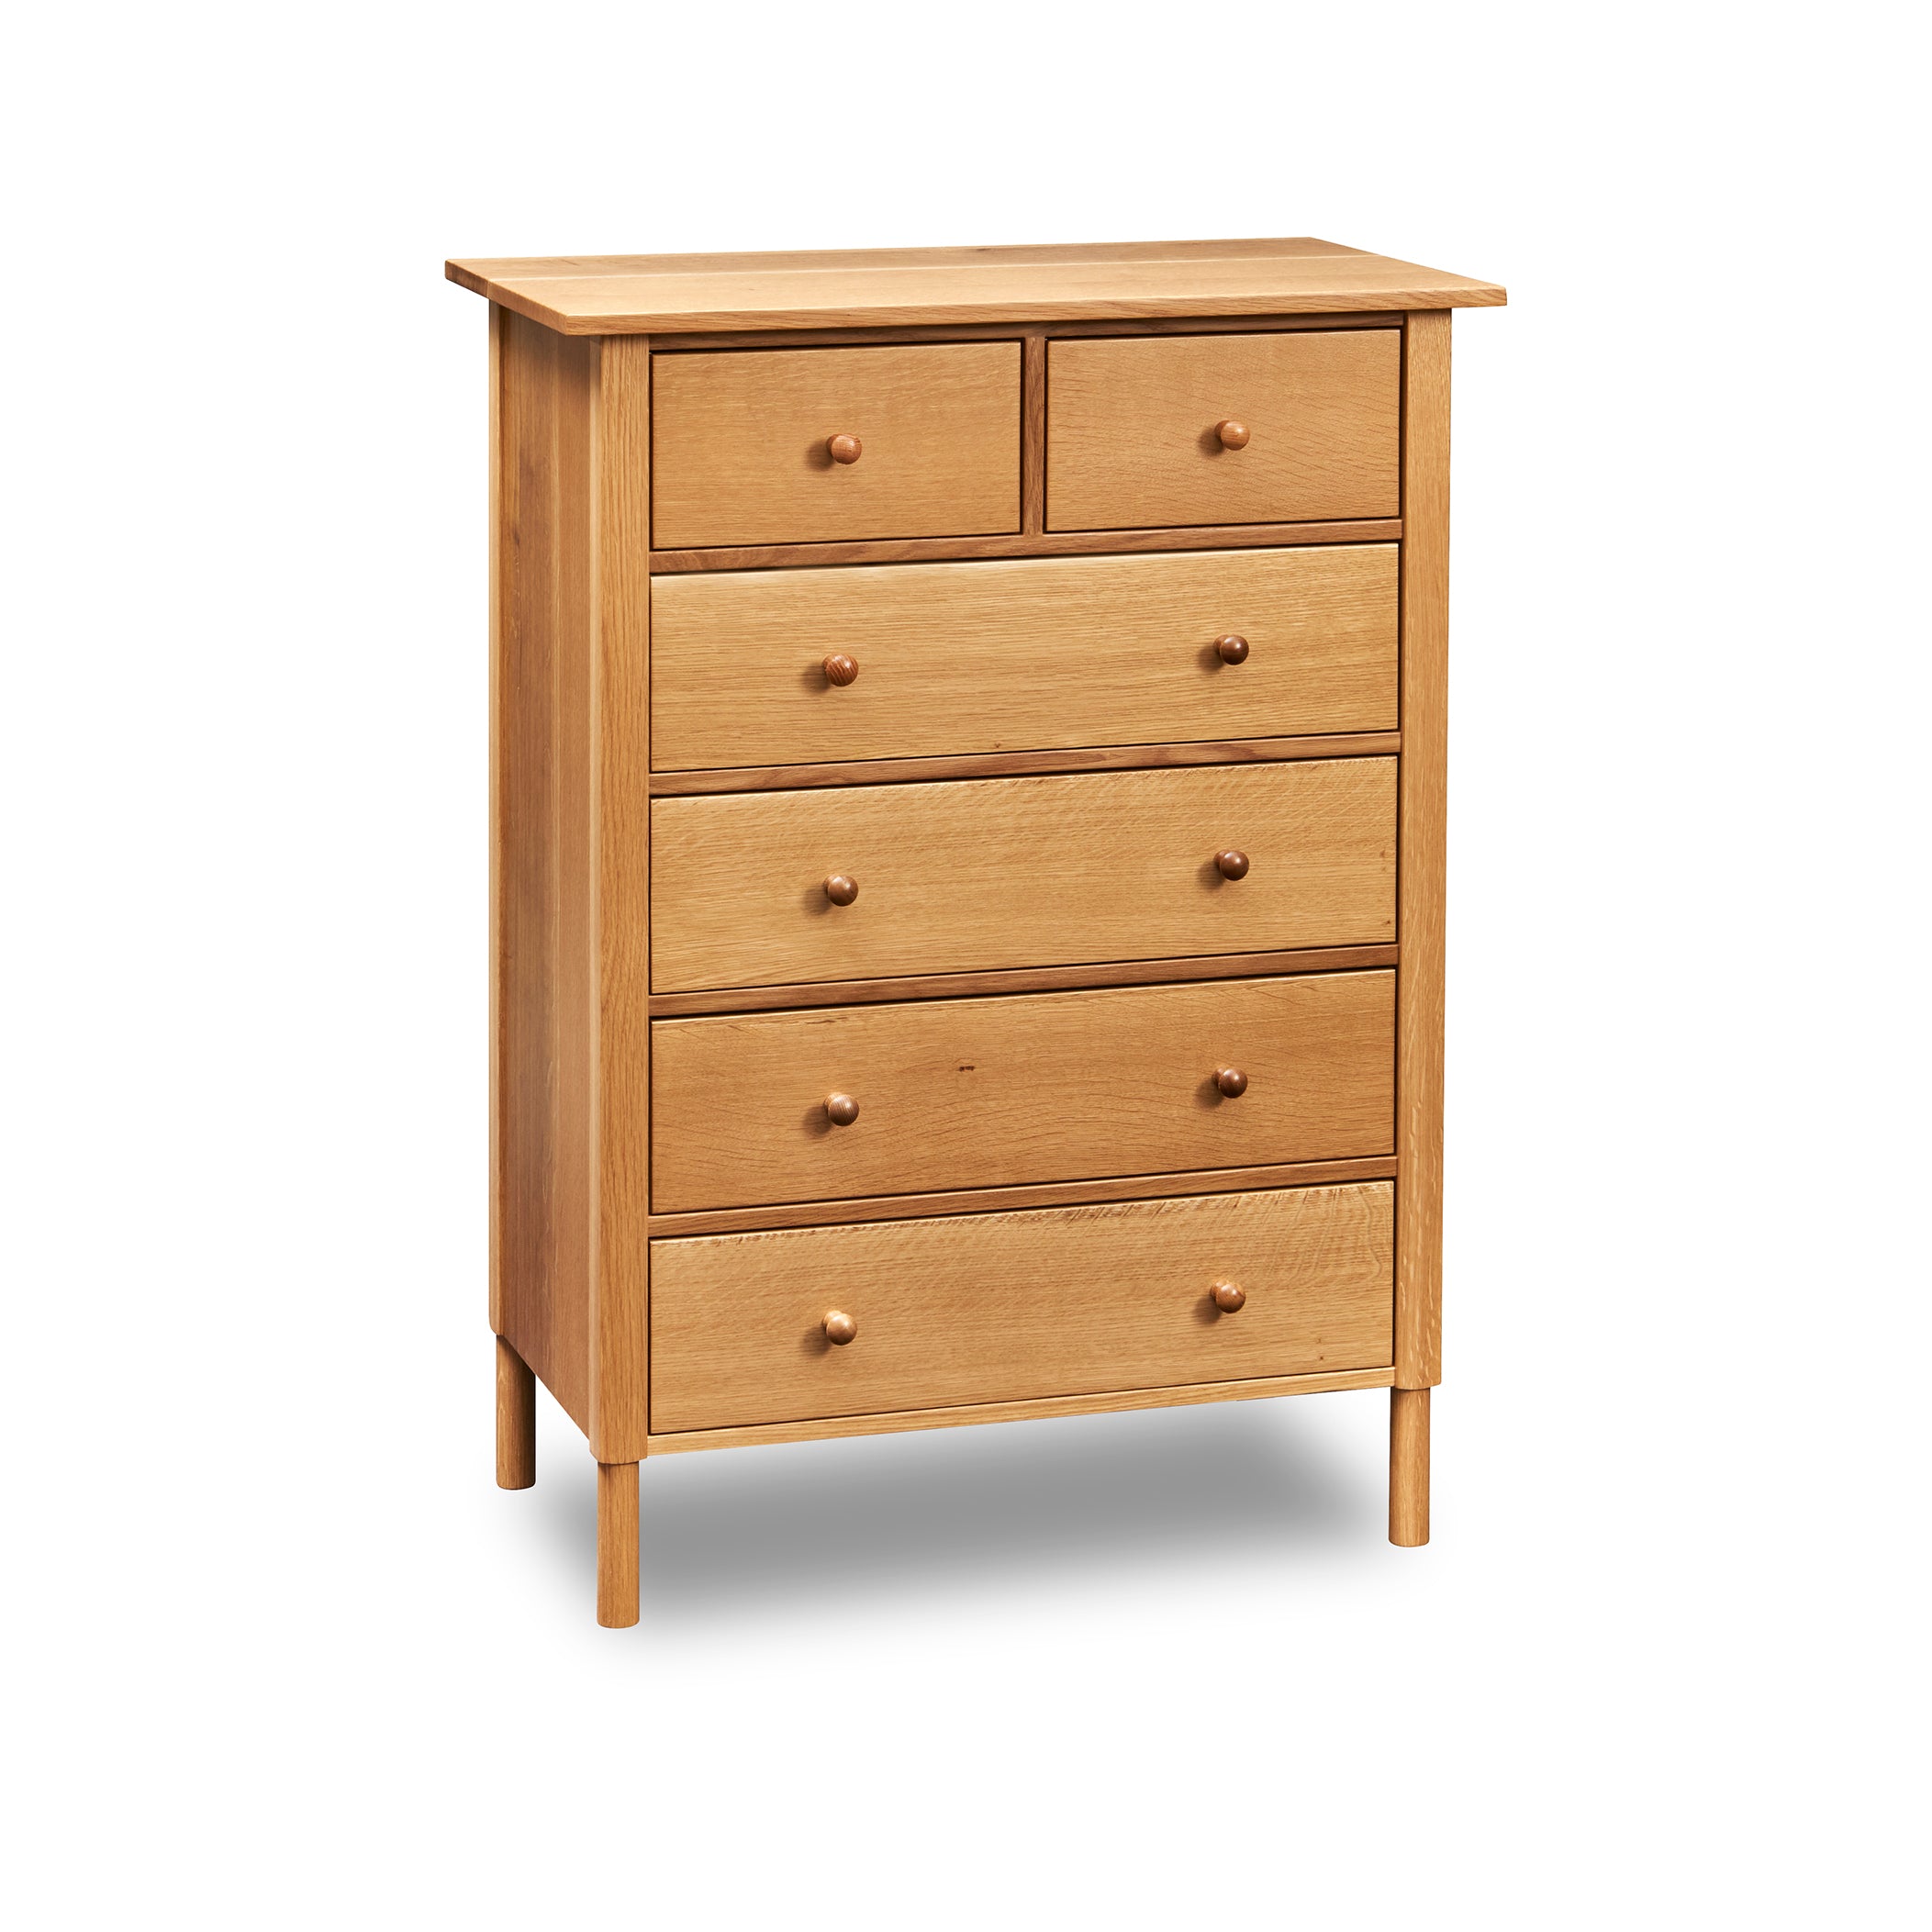 Modern interpretation of a classic Shaker style chest with six drawers and rounded legs, in solid white oak wood